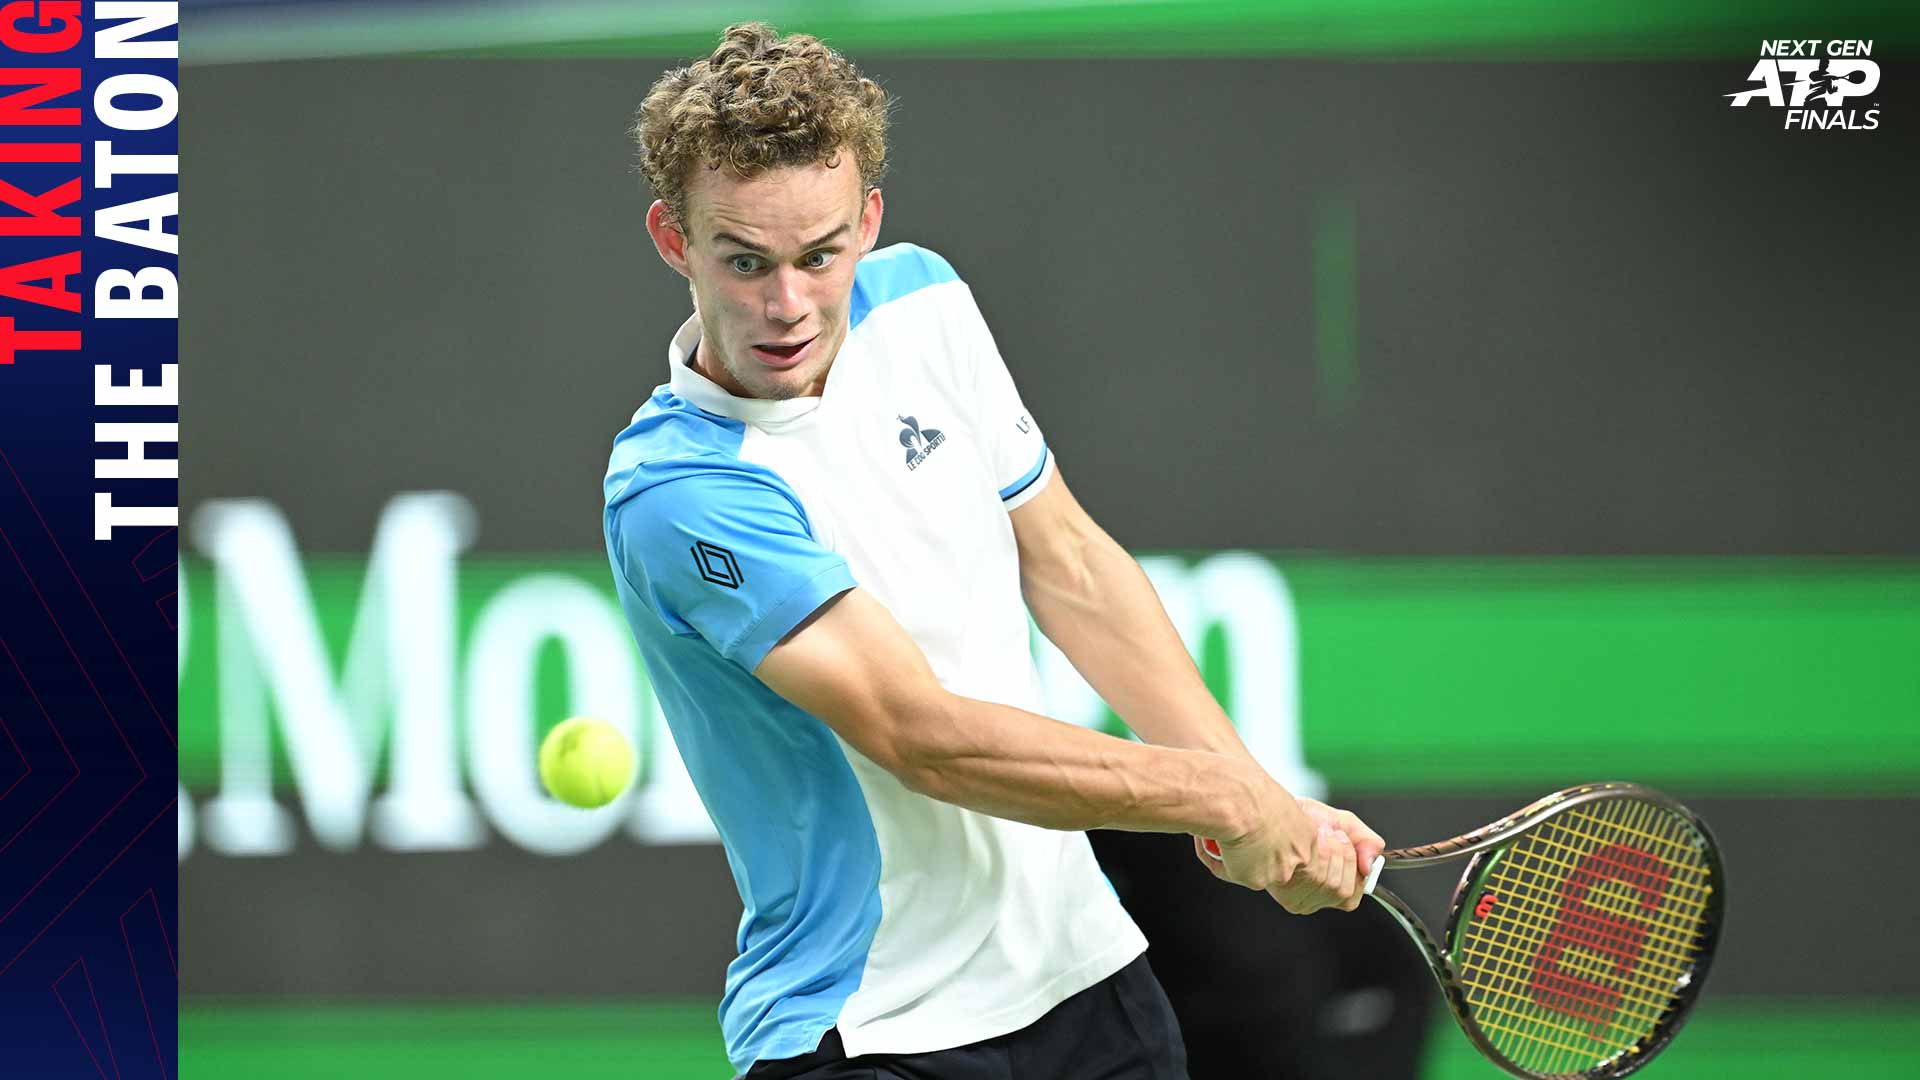 Luca Van Assche has won two ATP Challenger Tour titles this year.